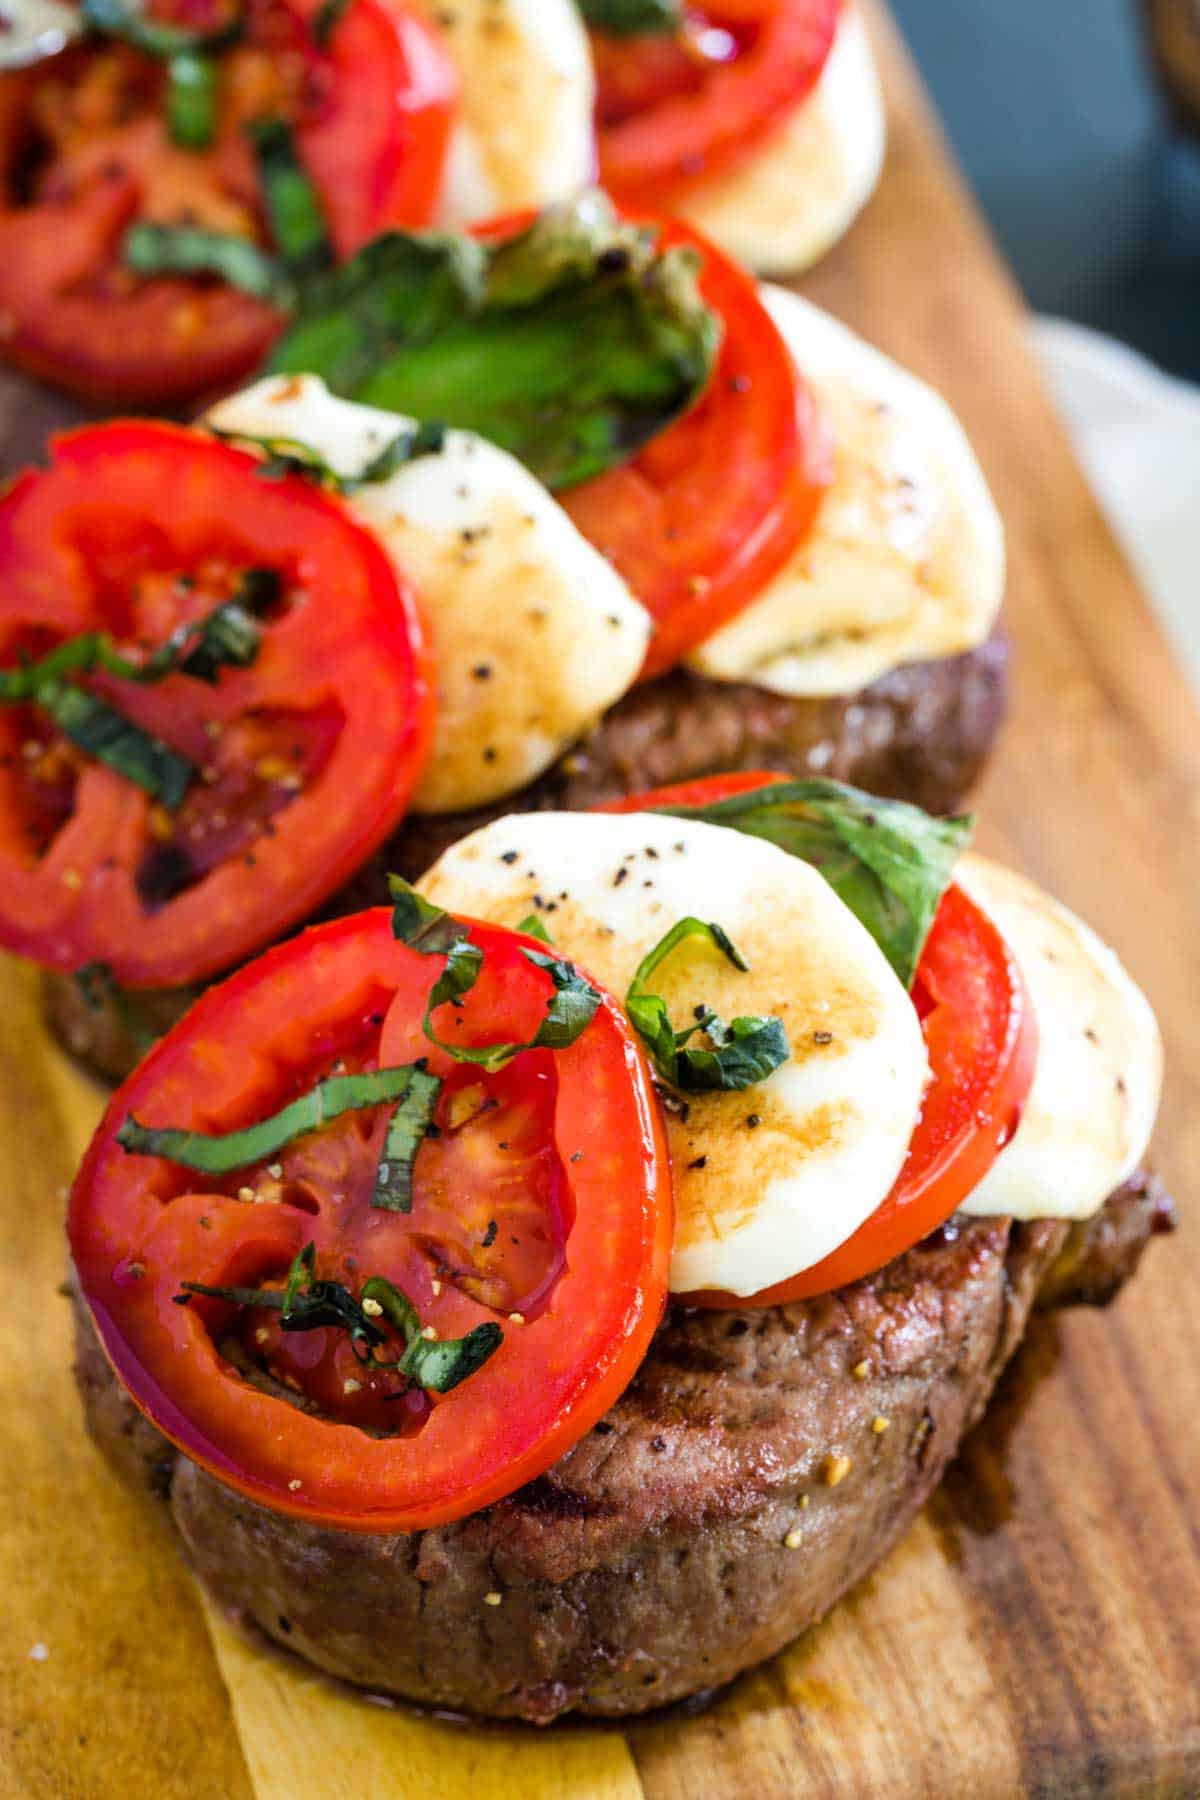 Grilled Caprese steaks are shown on a wooden board featuring slices of mozzarella and tomatoes.